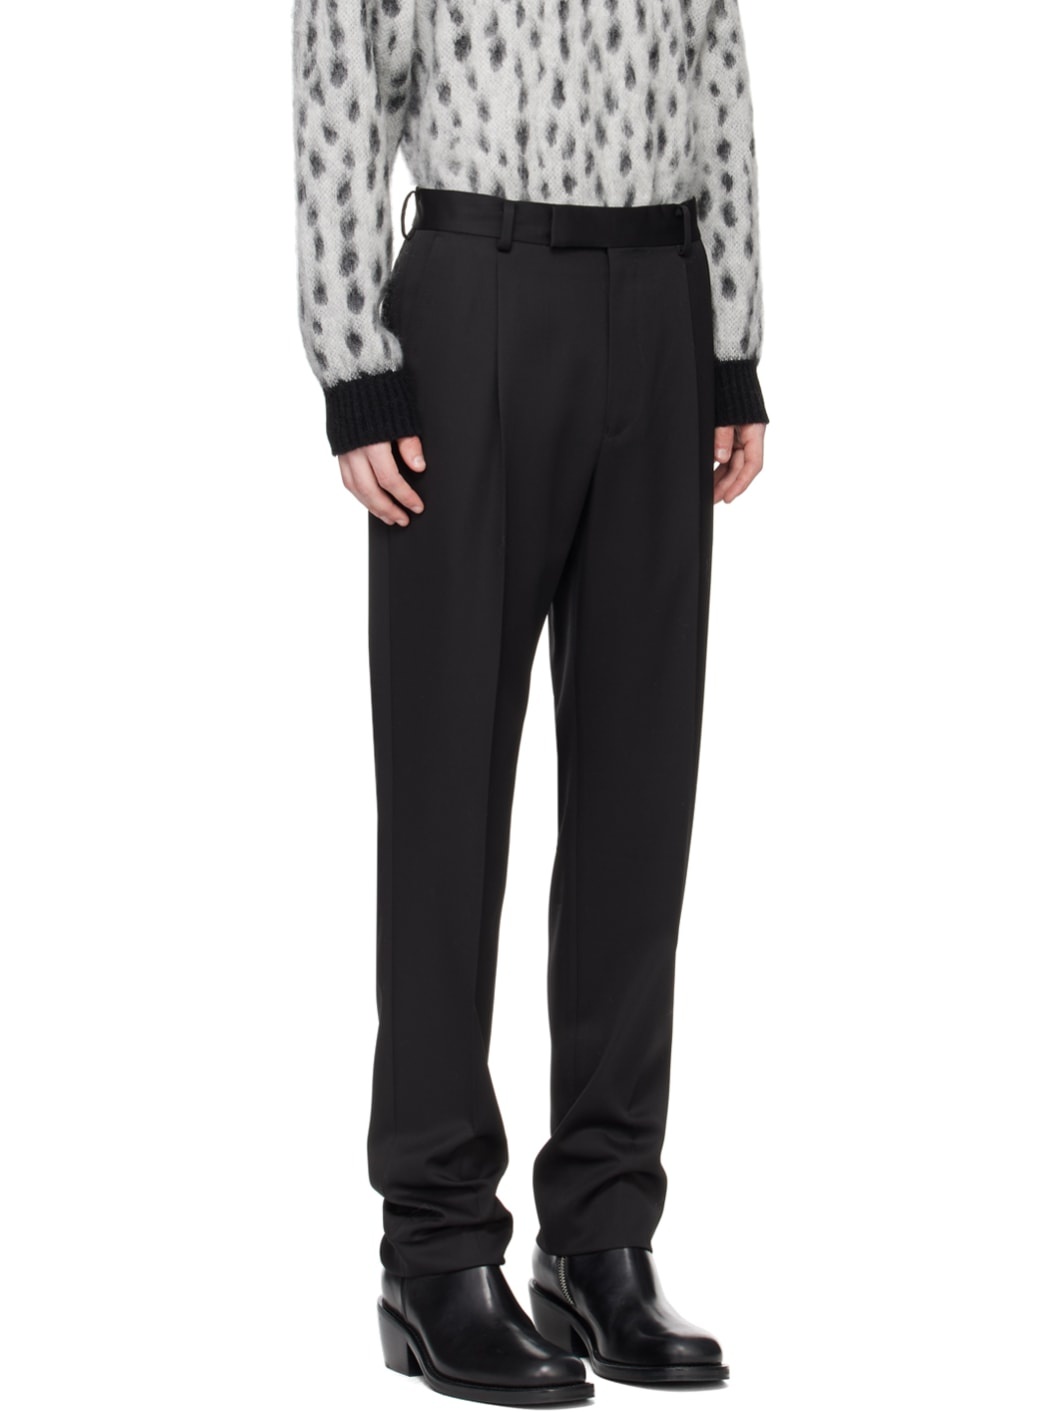 Black Type-2 Trousers - 2